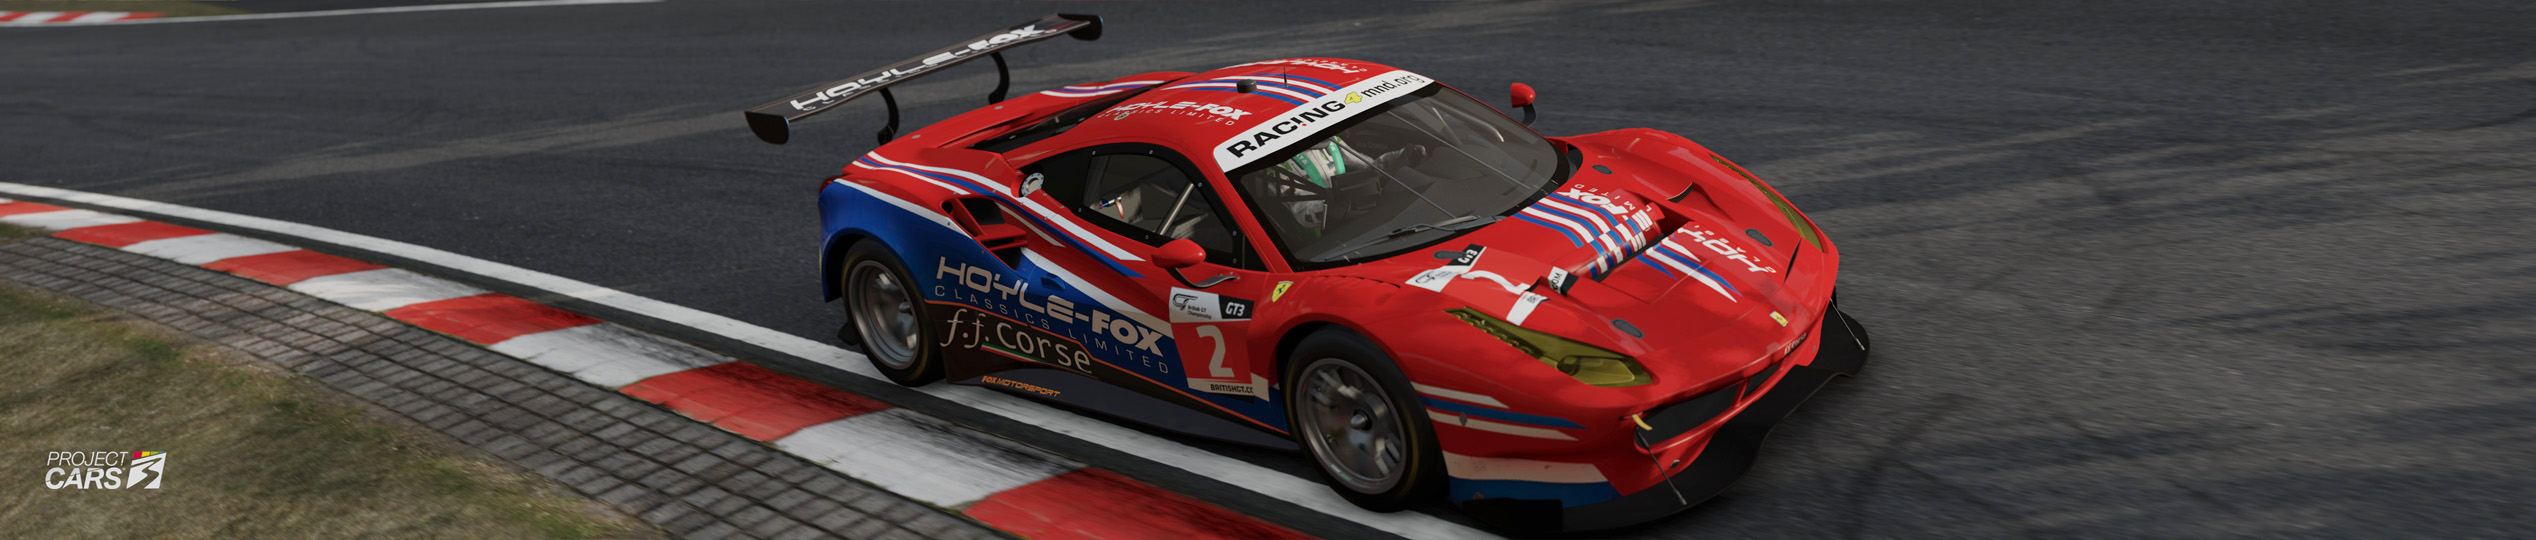 9b PROJECT CARS 3 GT3 at NORDSCHLEIFE crop copy.jpg